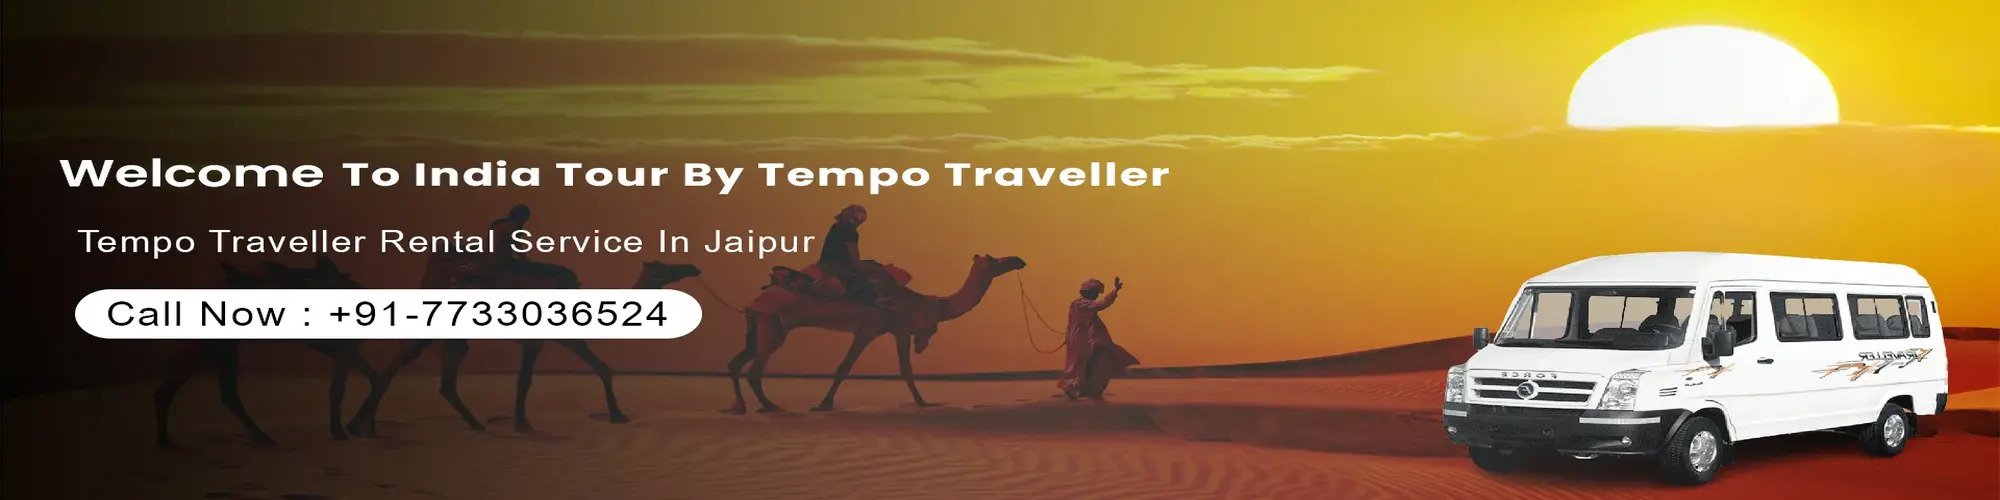 India Tour By Tempo Traveller  cover